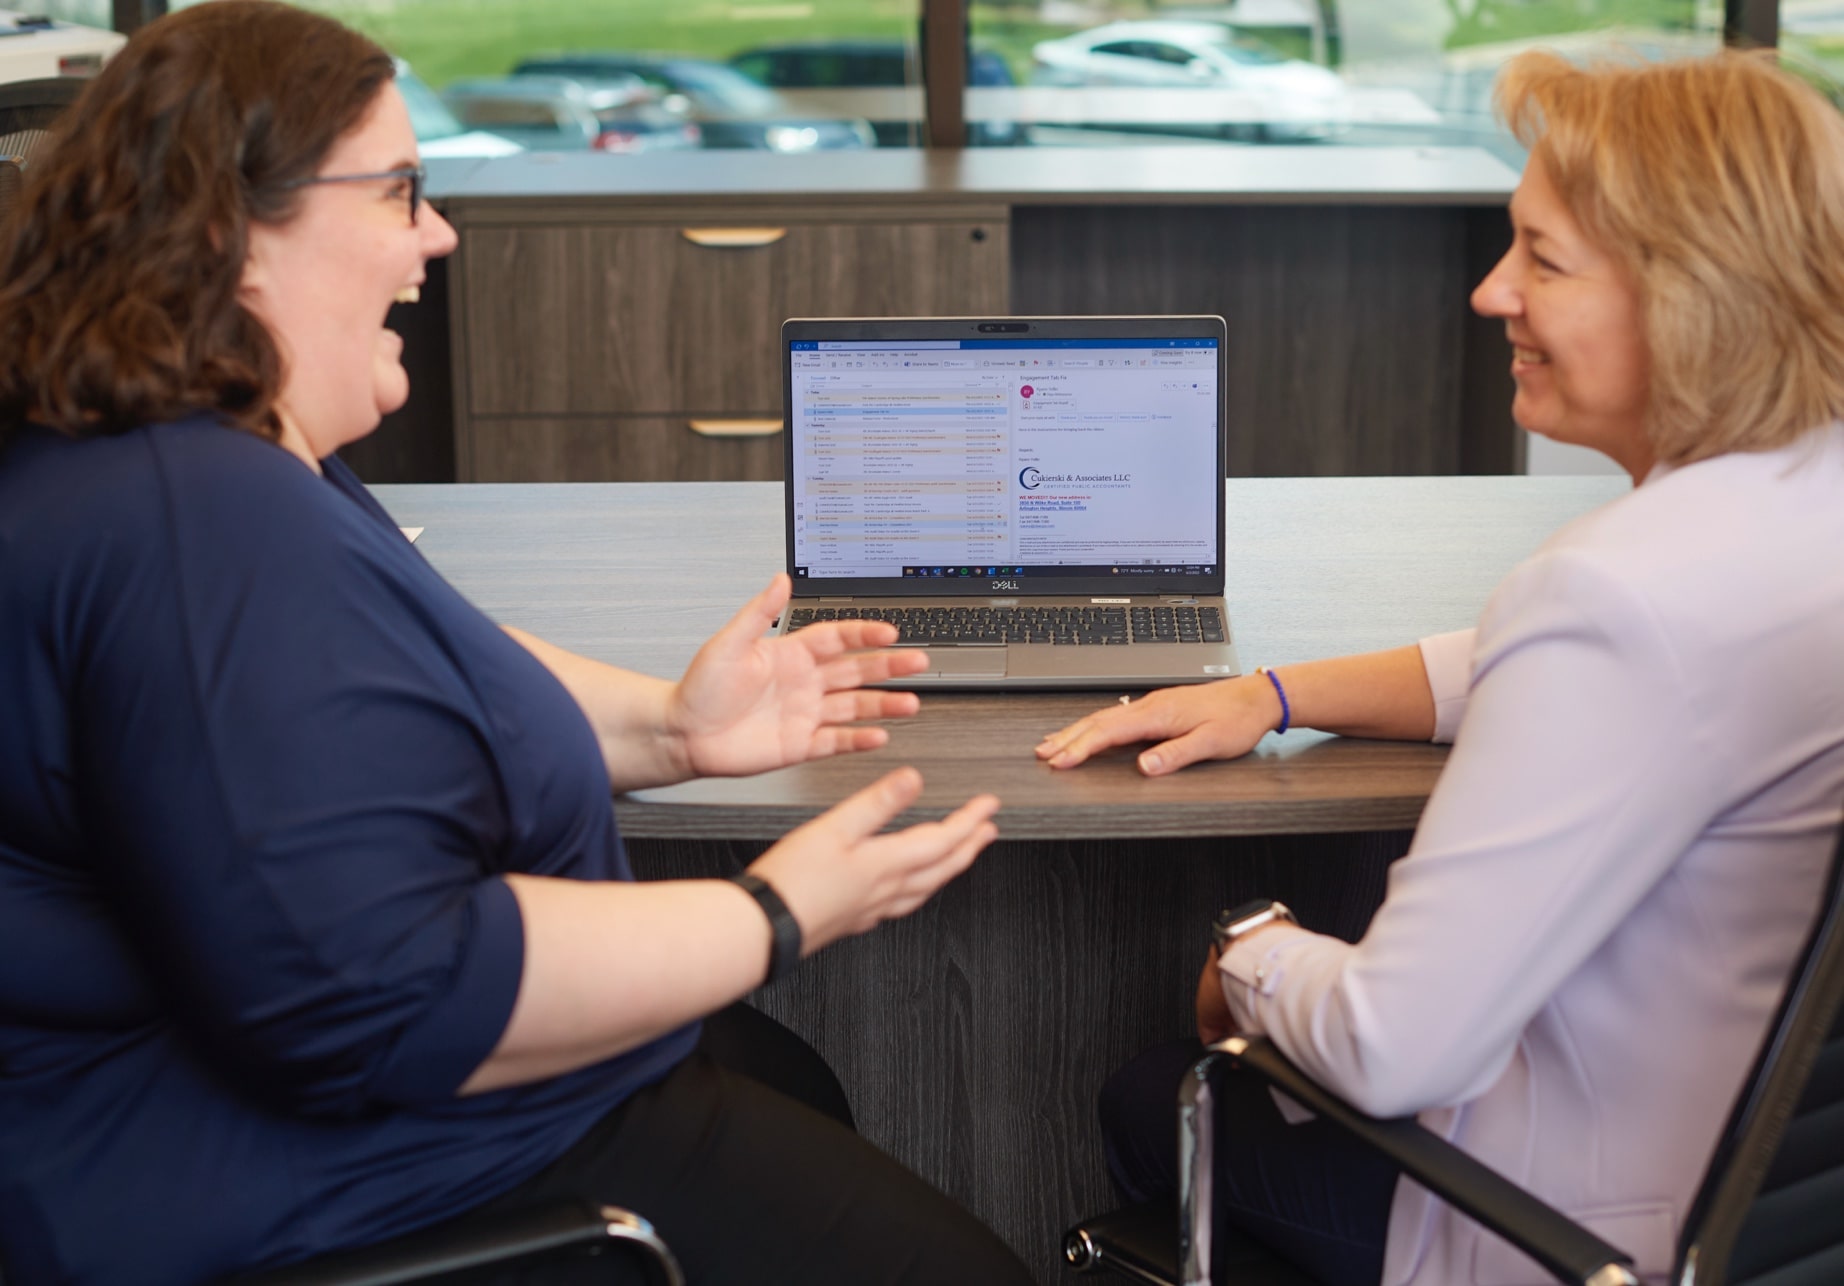 Two women sitting in office chairs having lively conversation in front of a laptop